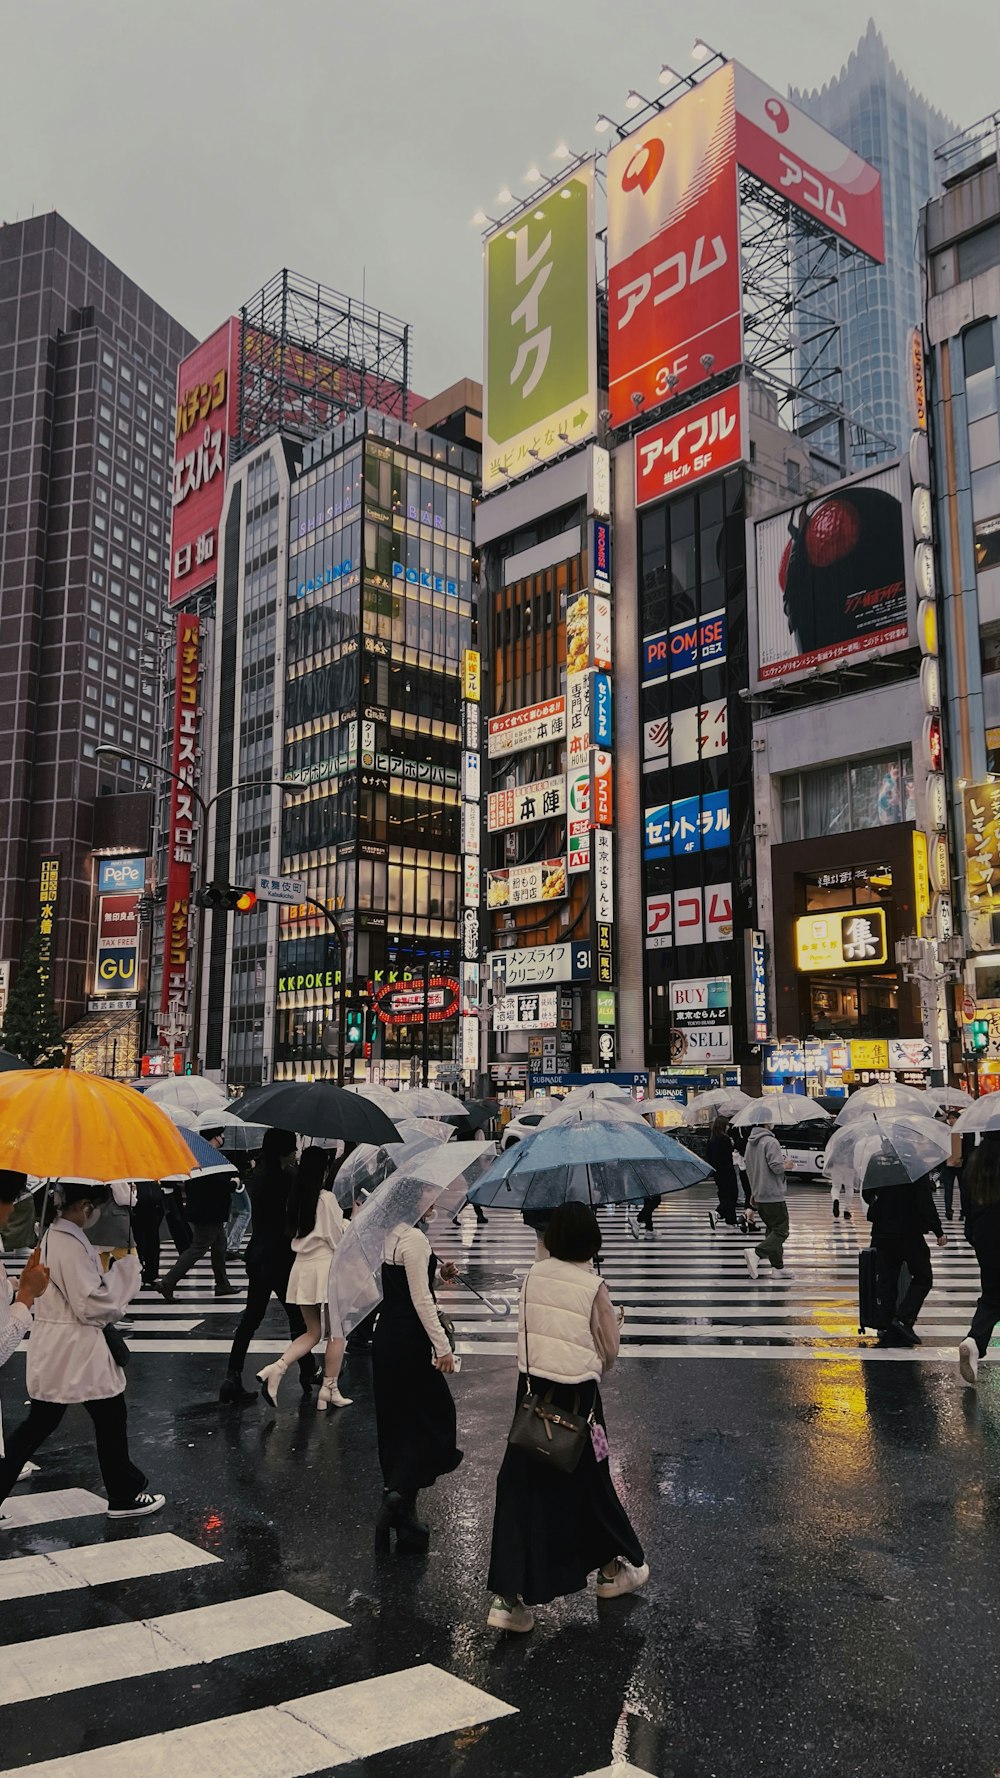 a group of people walking across a street holding umbrellas